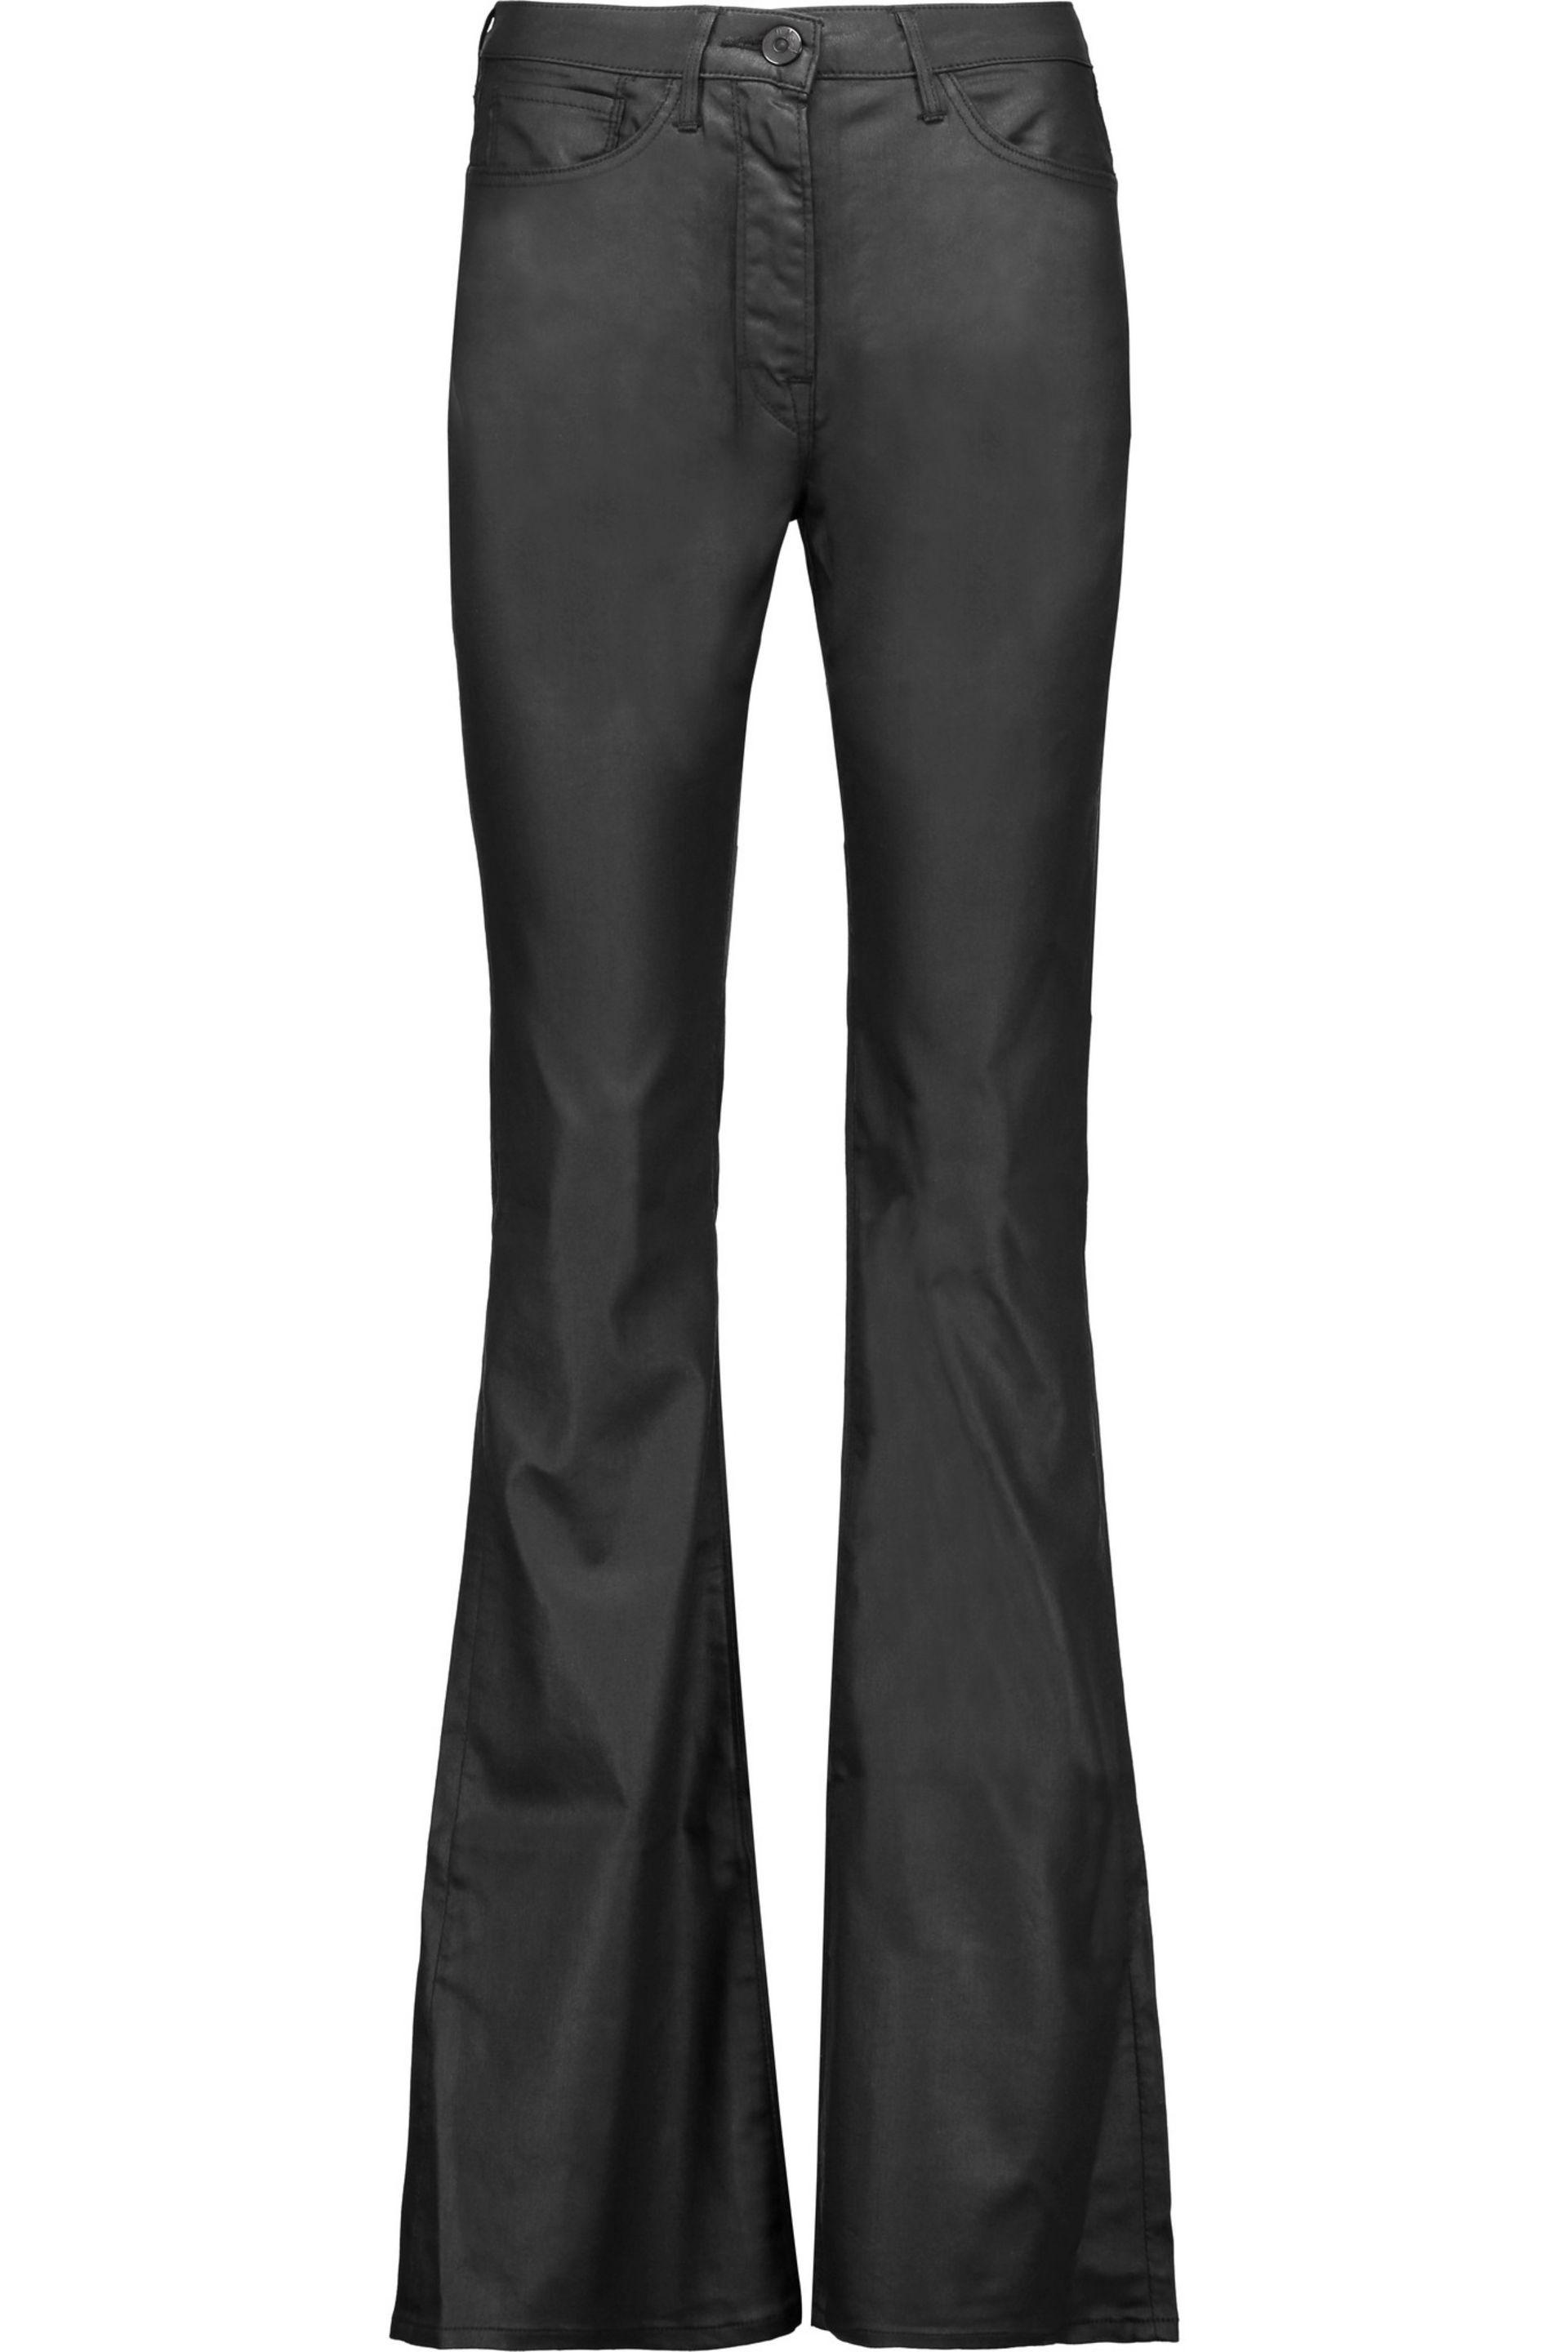 3x1 Denim Mid-rise Coated Flared Jeans in Black - Lyst